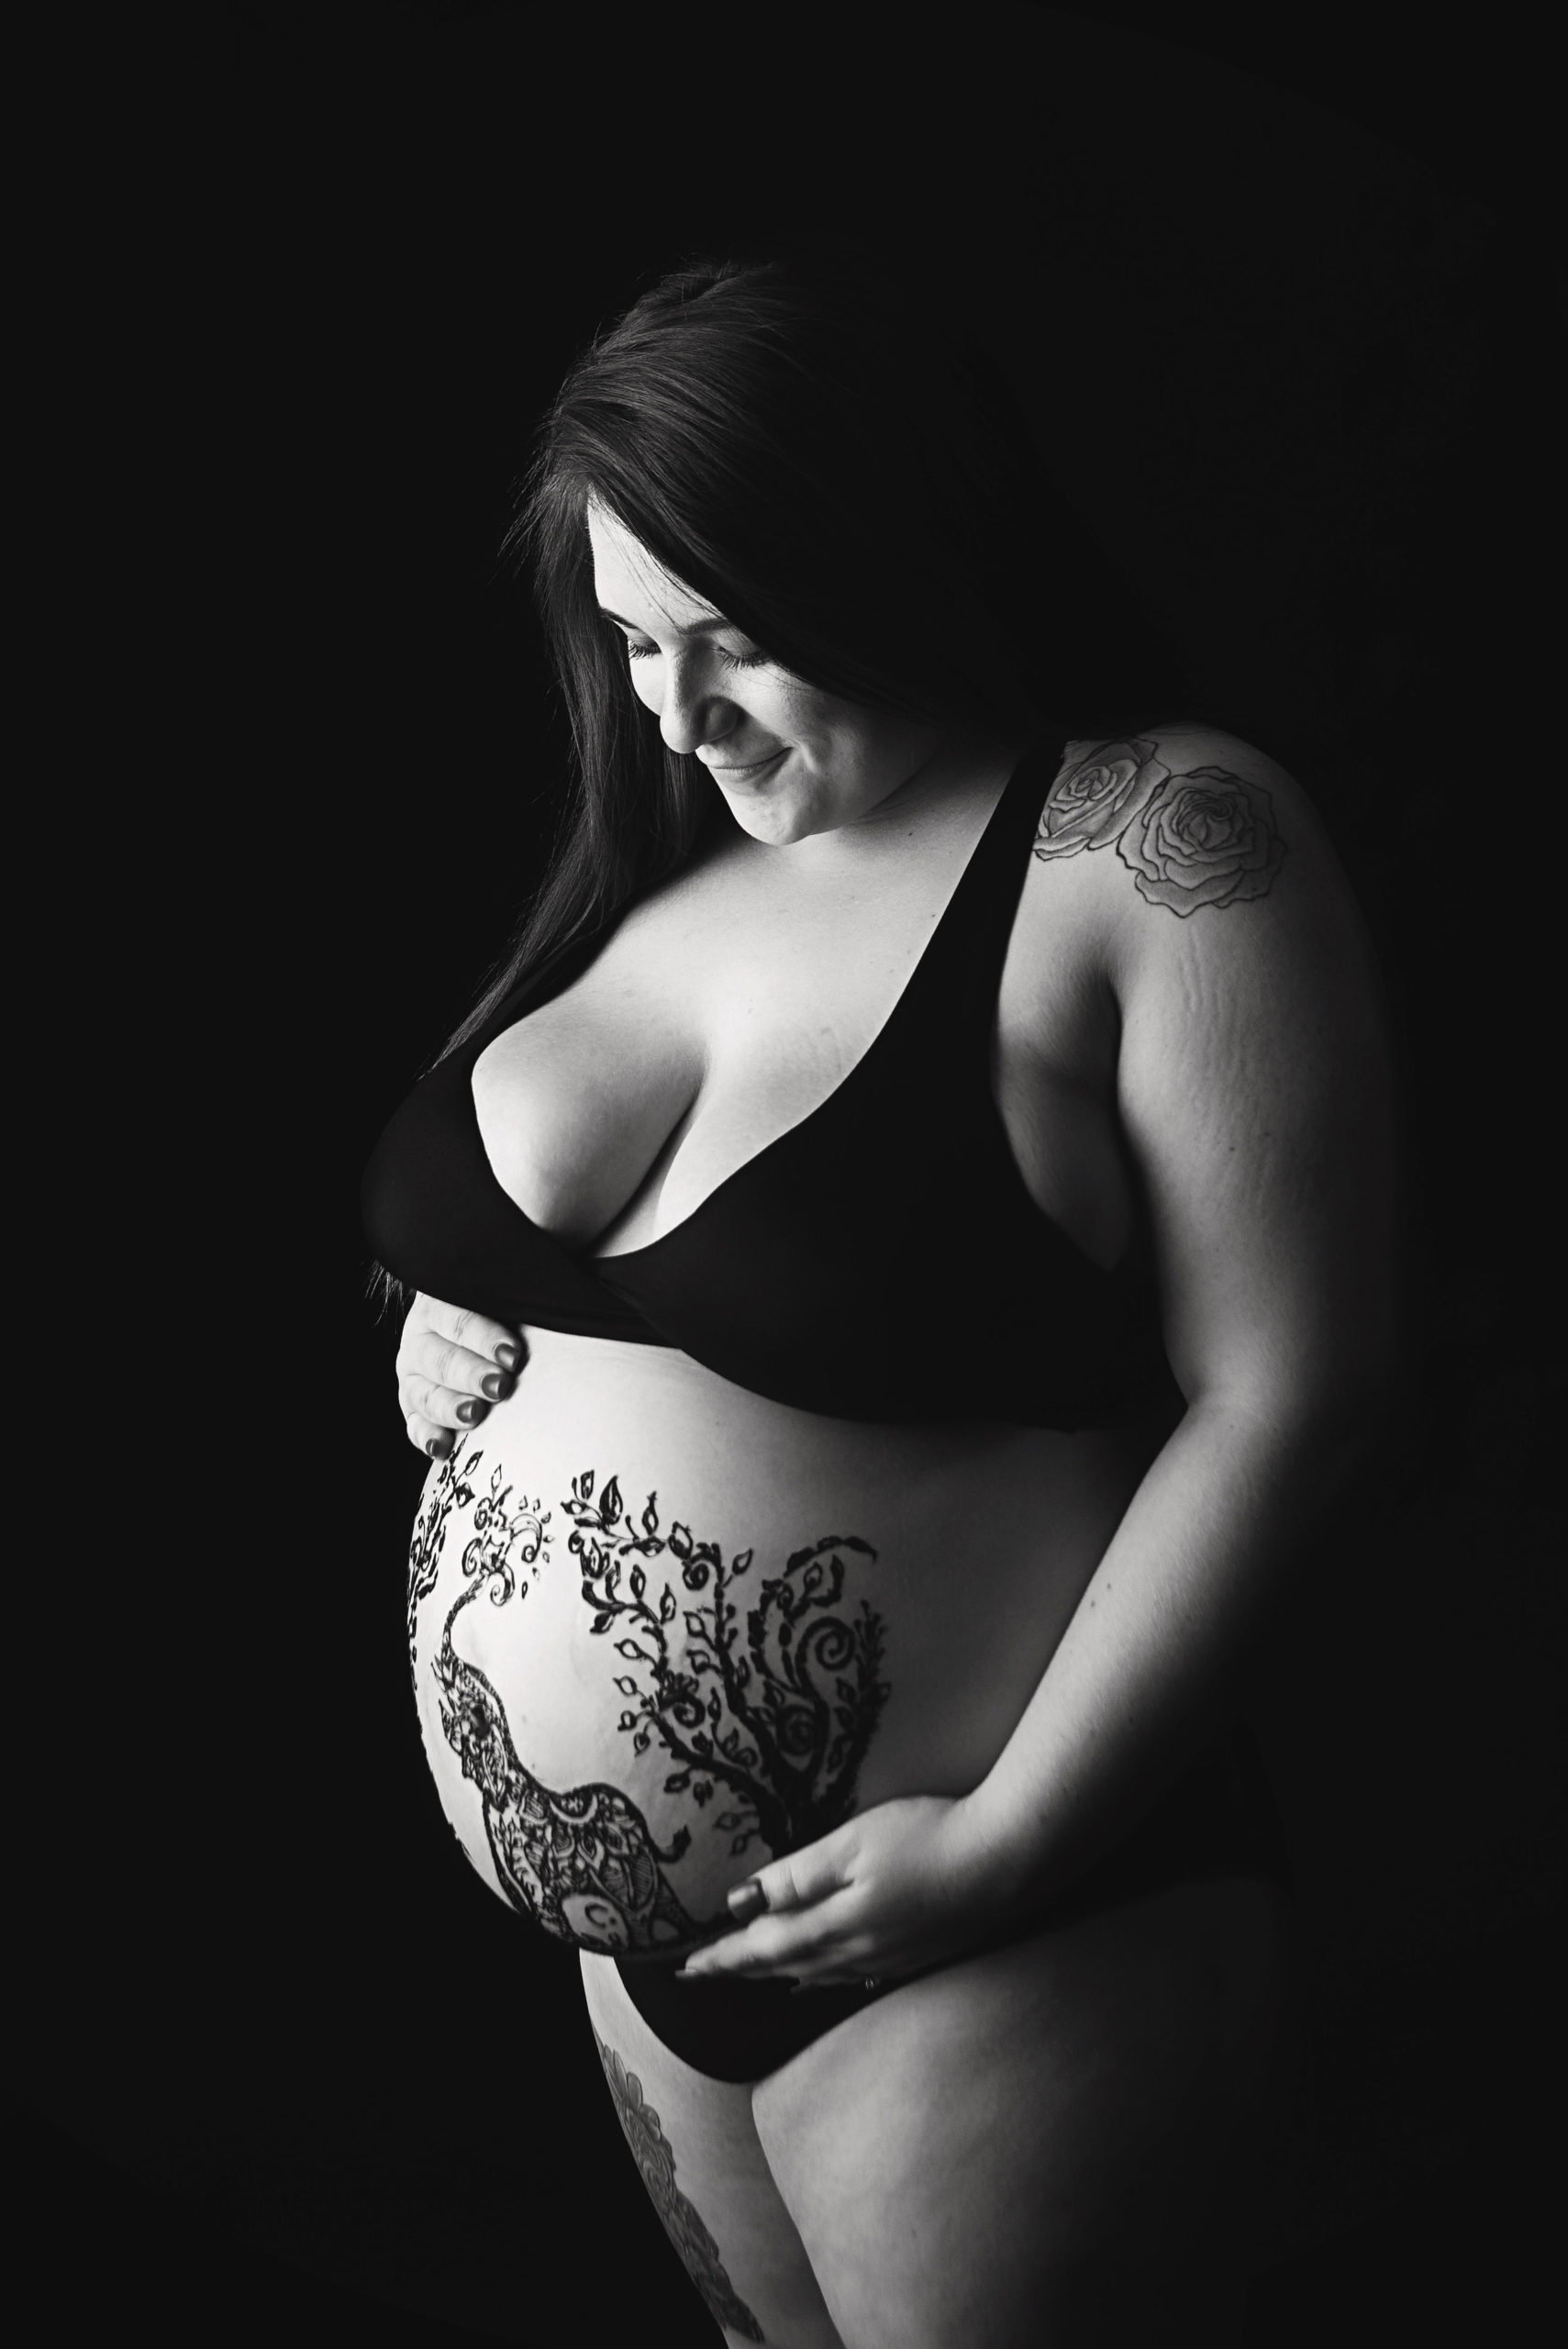 st-louis-maternity-henna-photography-black-and-white-henna-belly-with-elephant-design.jpg